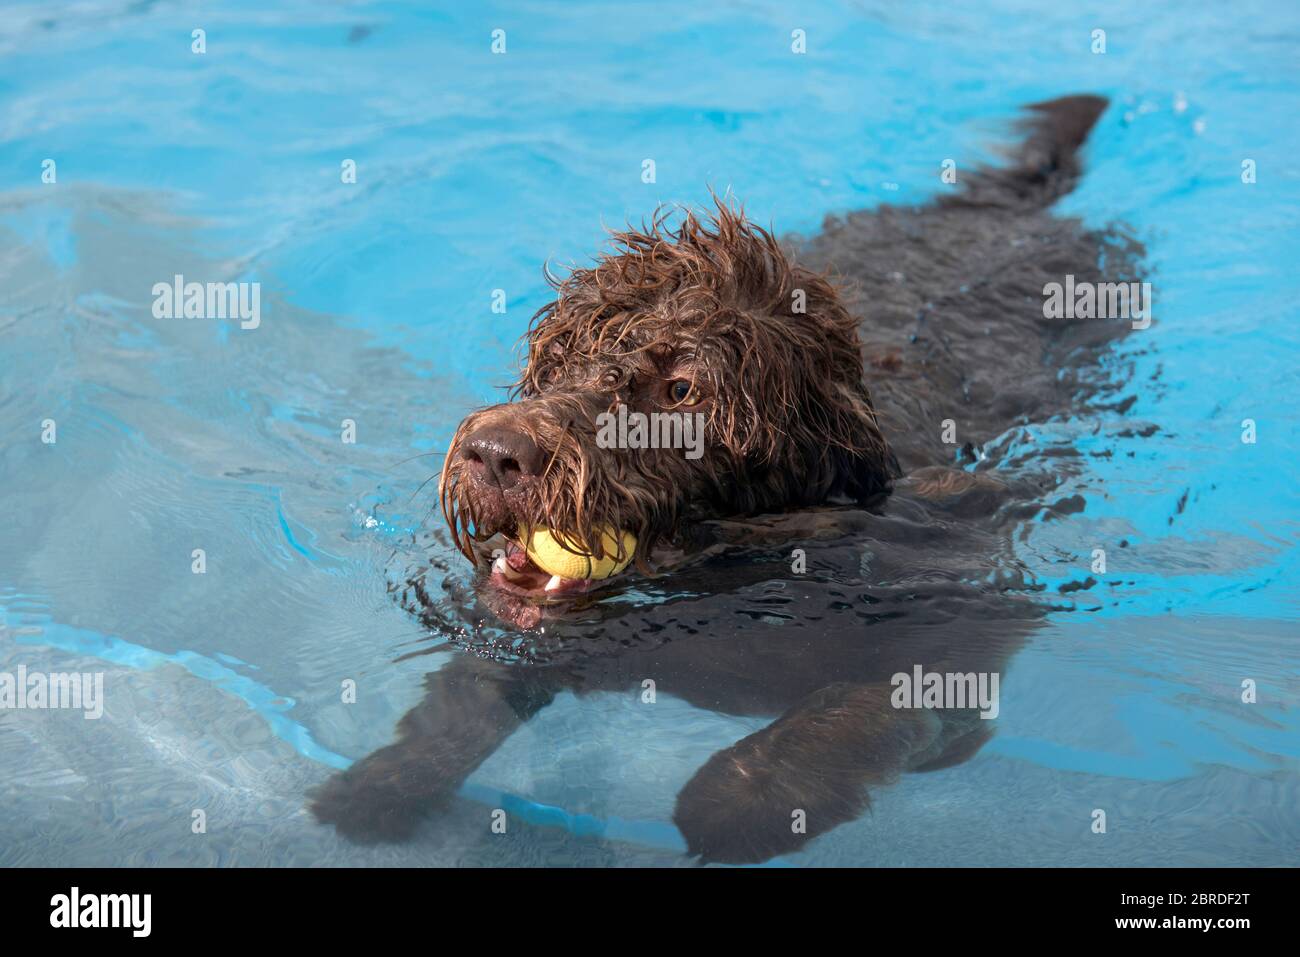 Dogs play with balls and swim in the outdoor swimming pool at the Saltdean Lido which allowed canine guests. Stock Photo